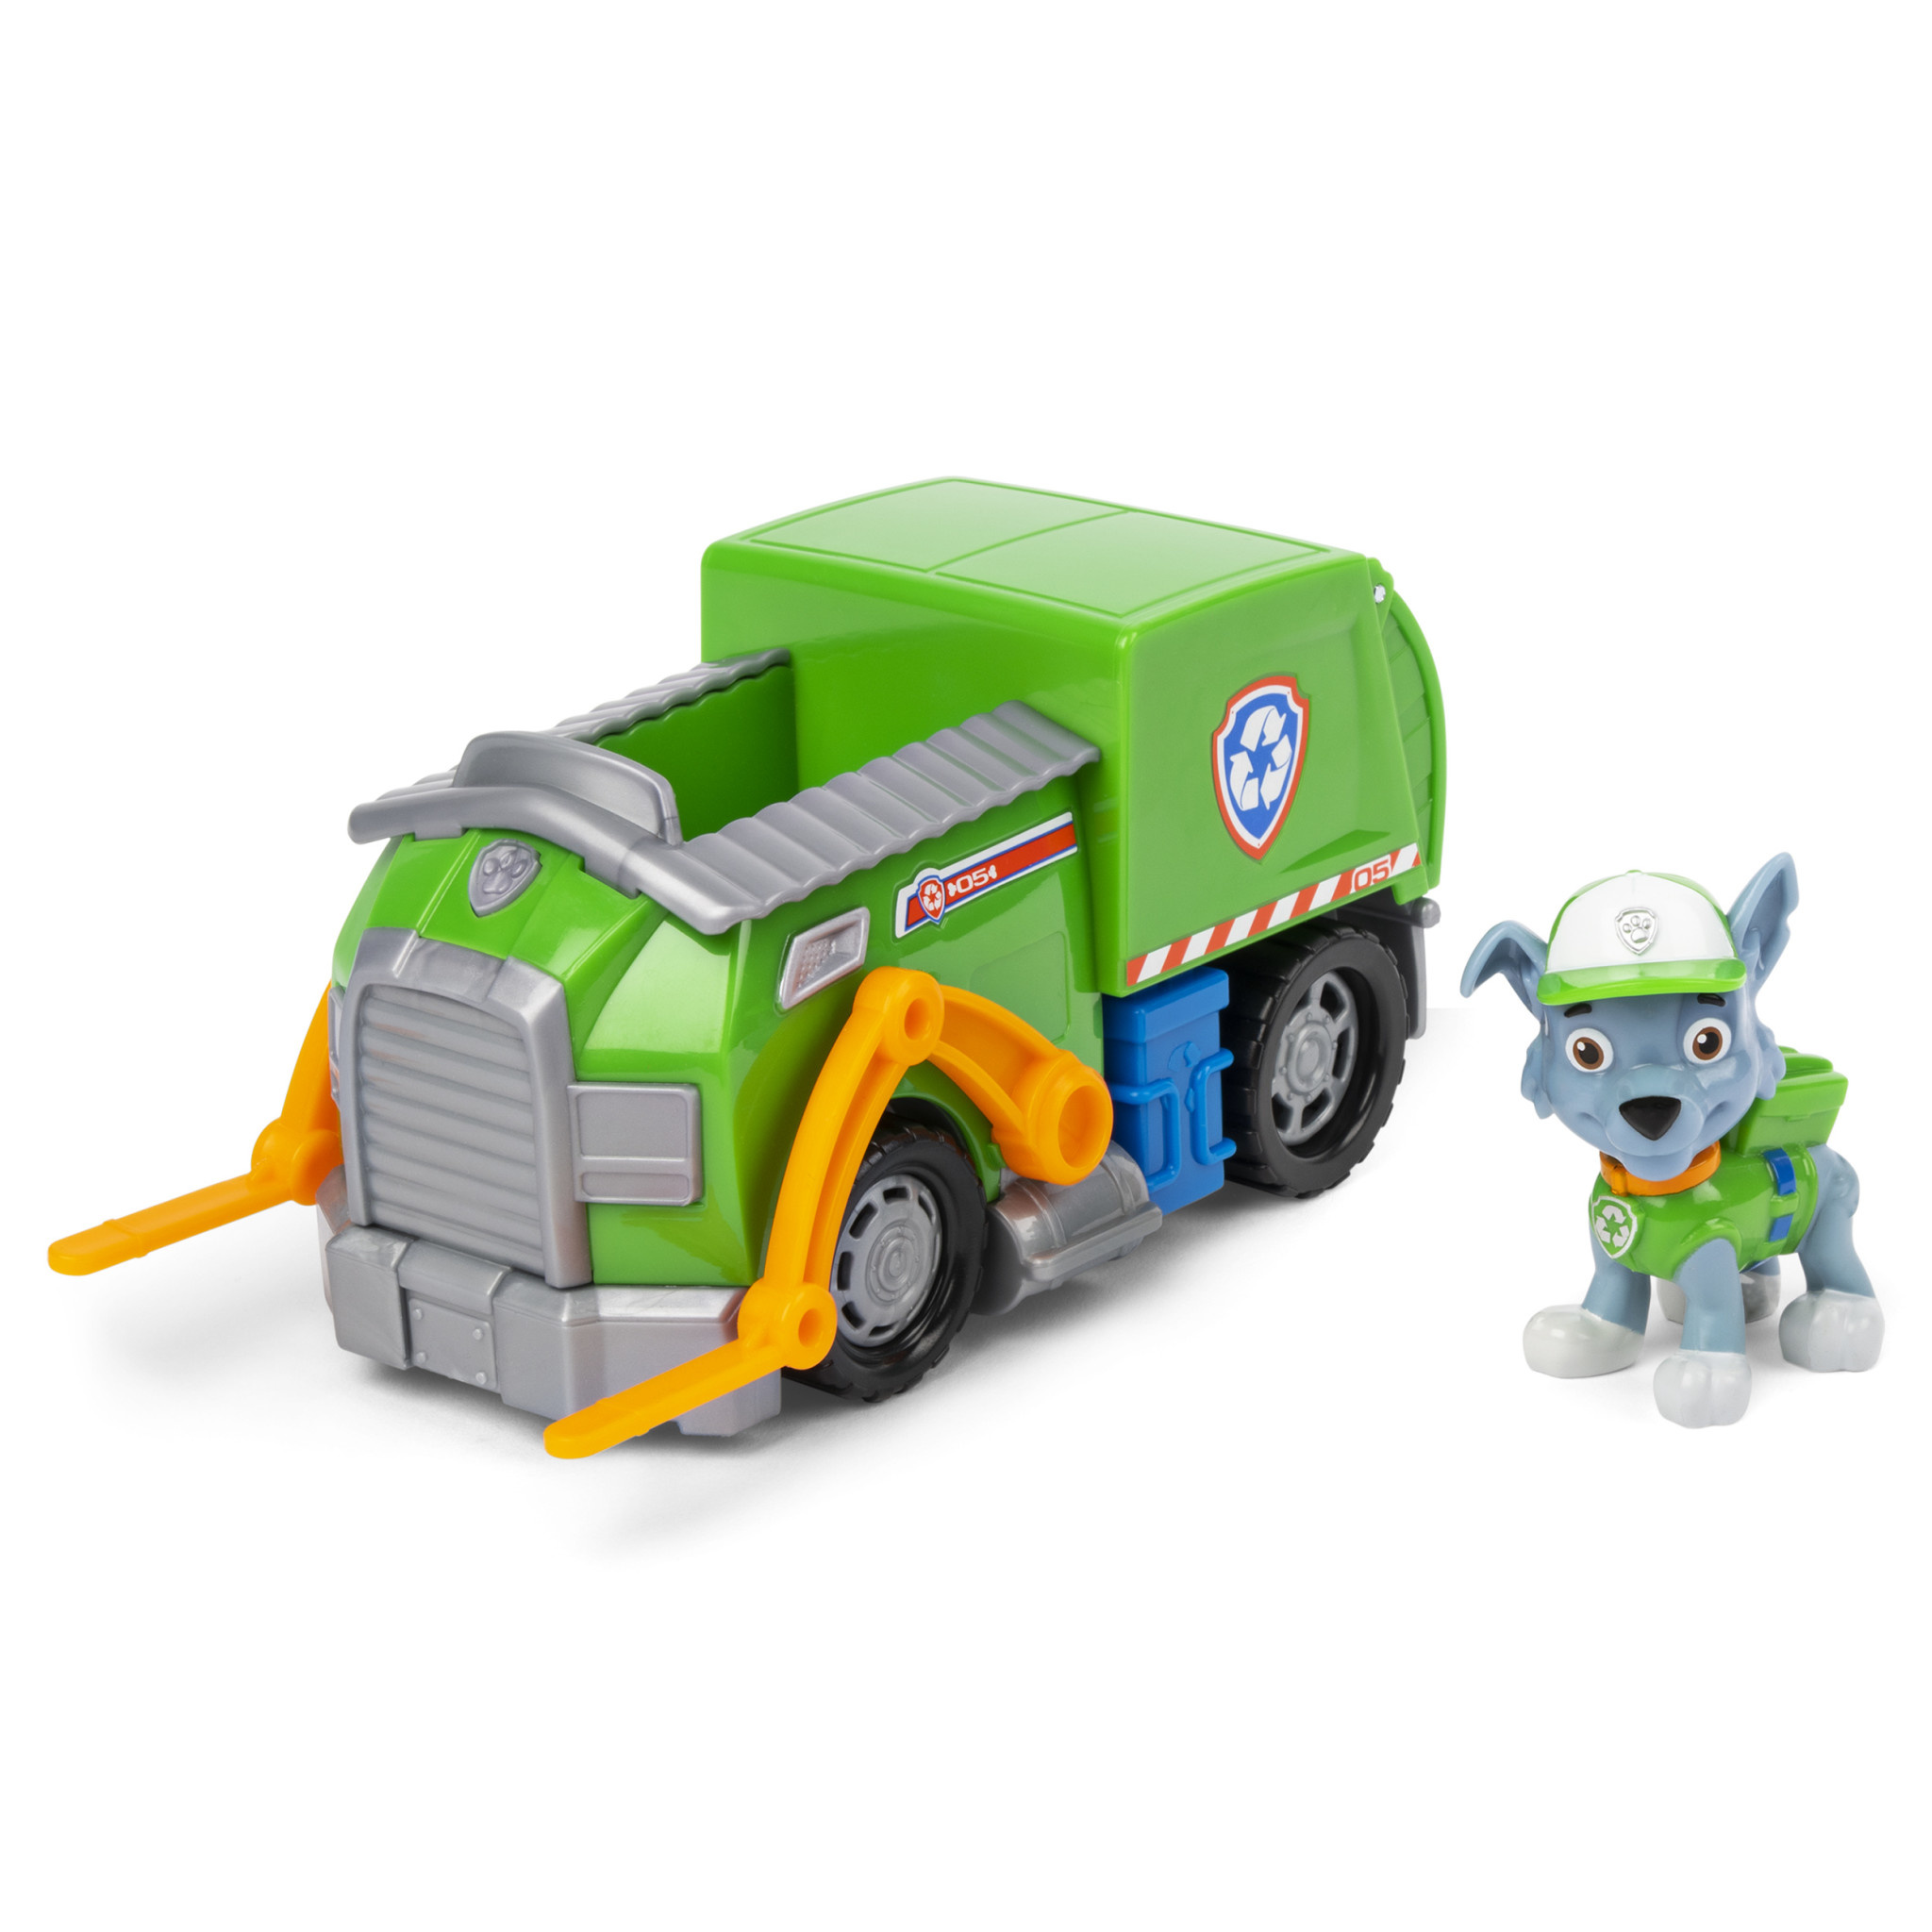 paw patrol recycle truck